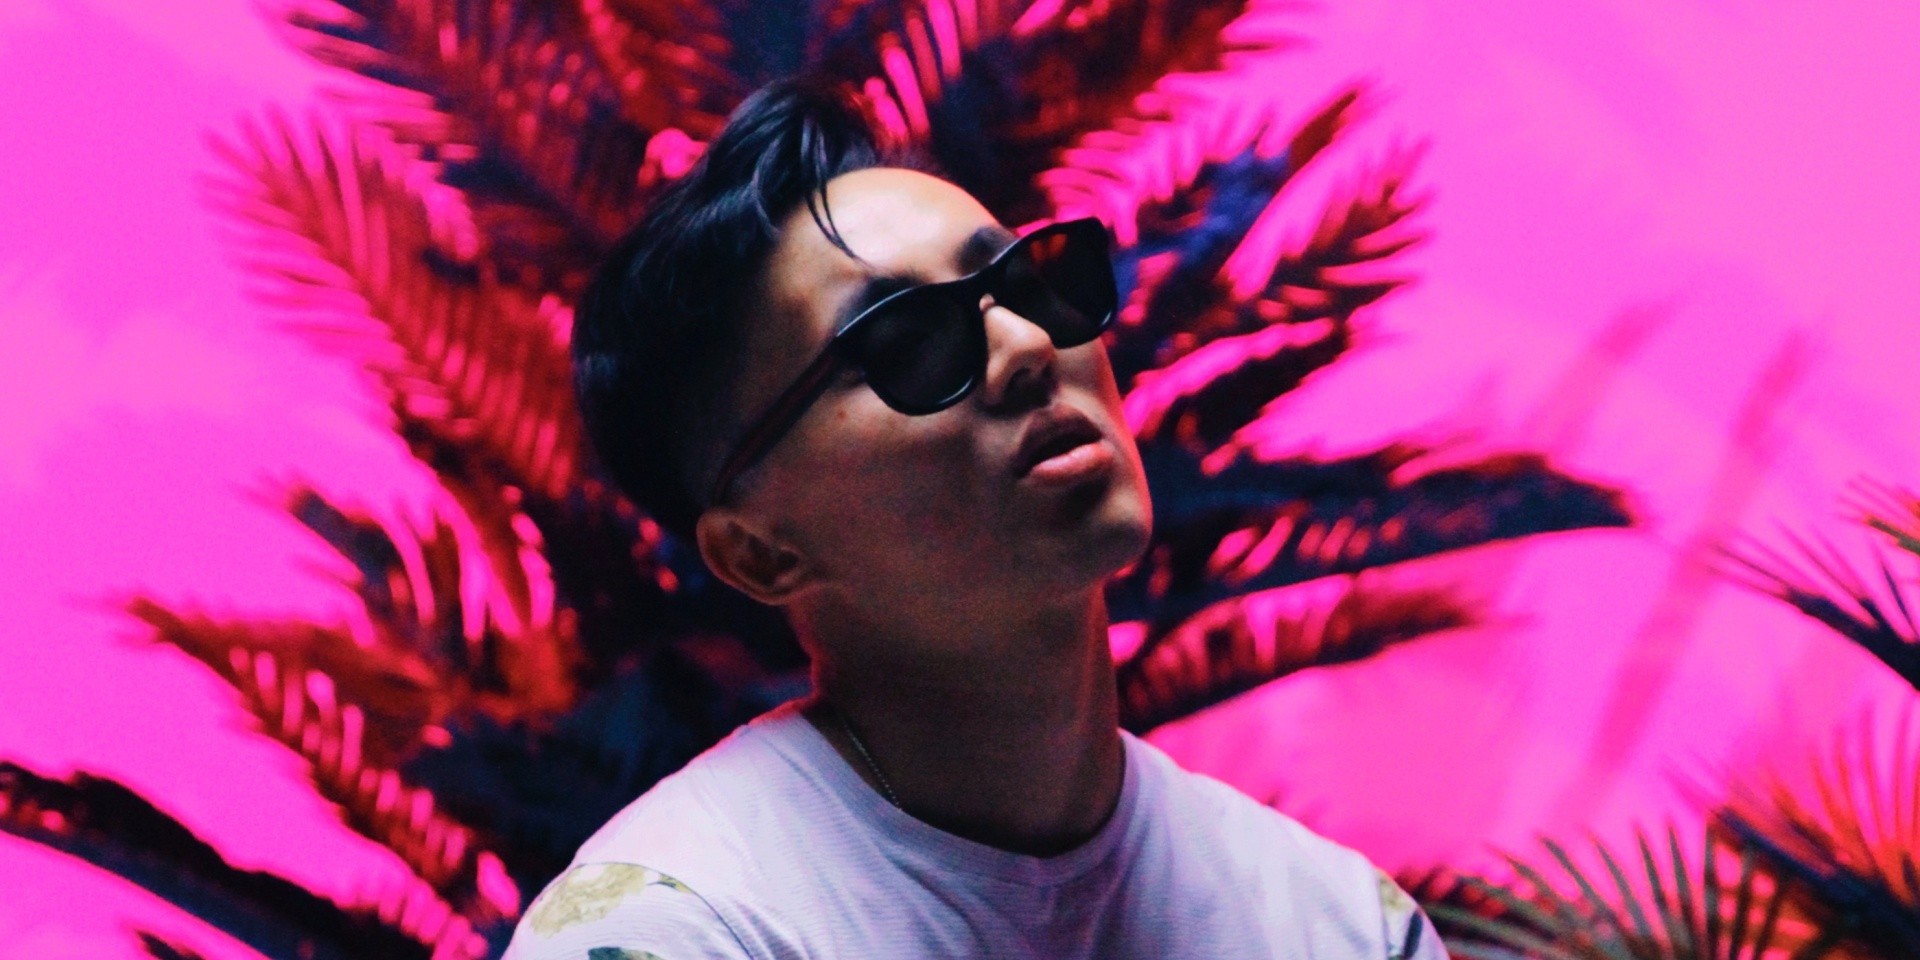 Lui Peng embraces simplicity in music video for 'Little Love' — watch